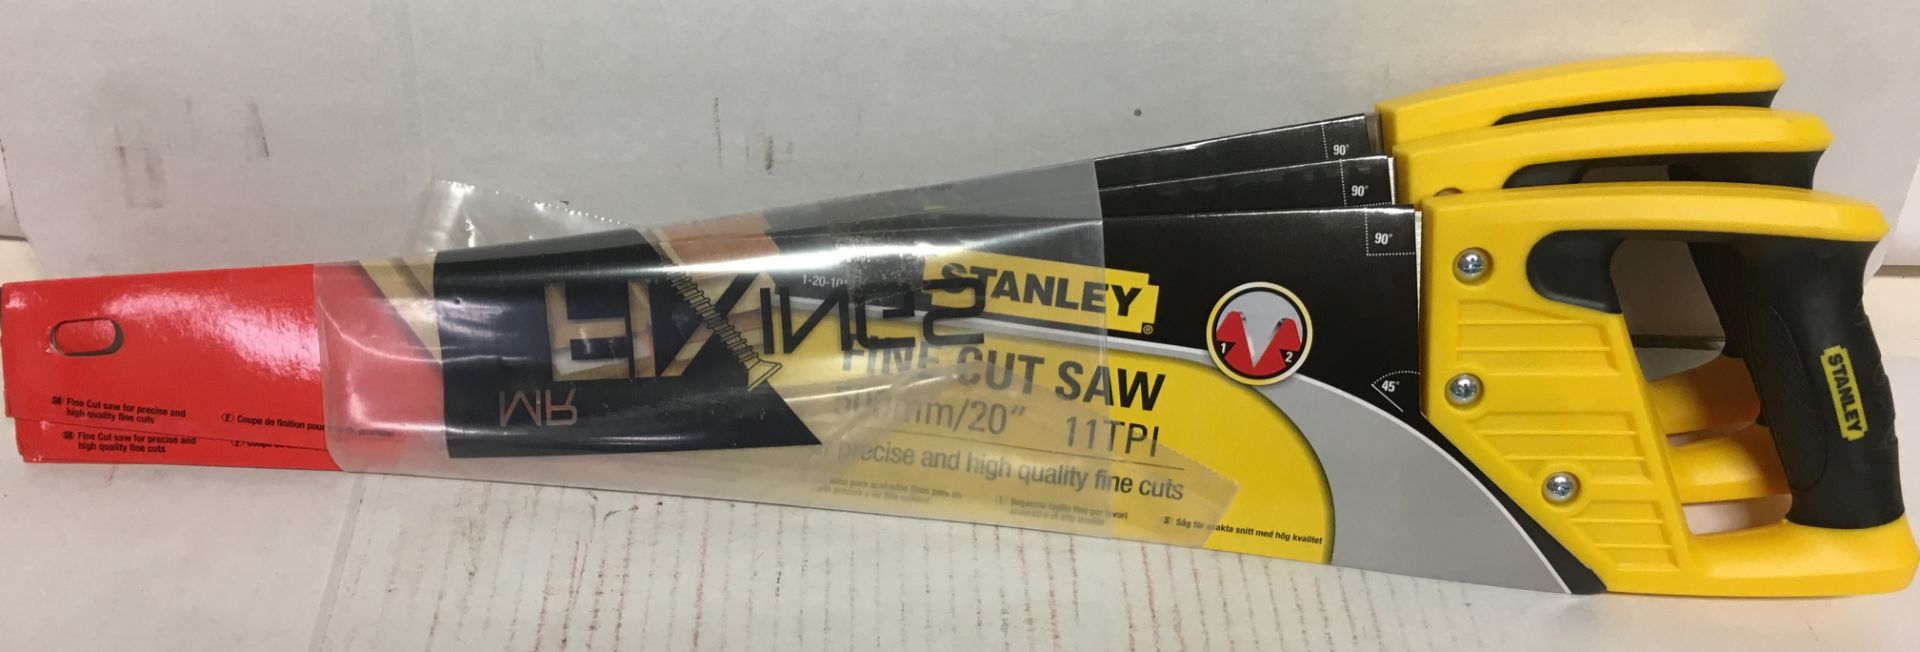 9 x Stanley handsaws, as listed | RRP £ 140.91 - Image 4 of 4